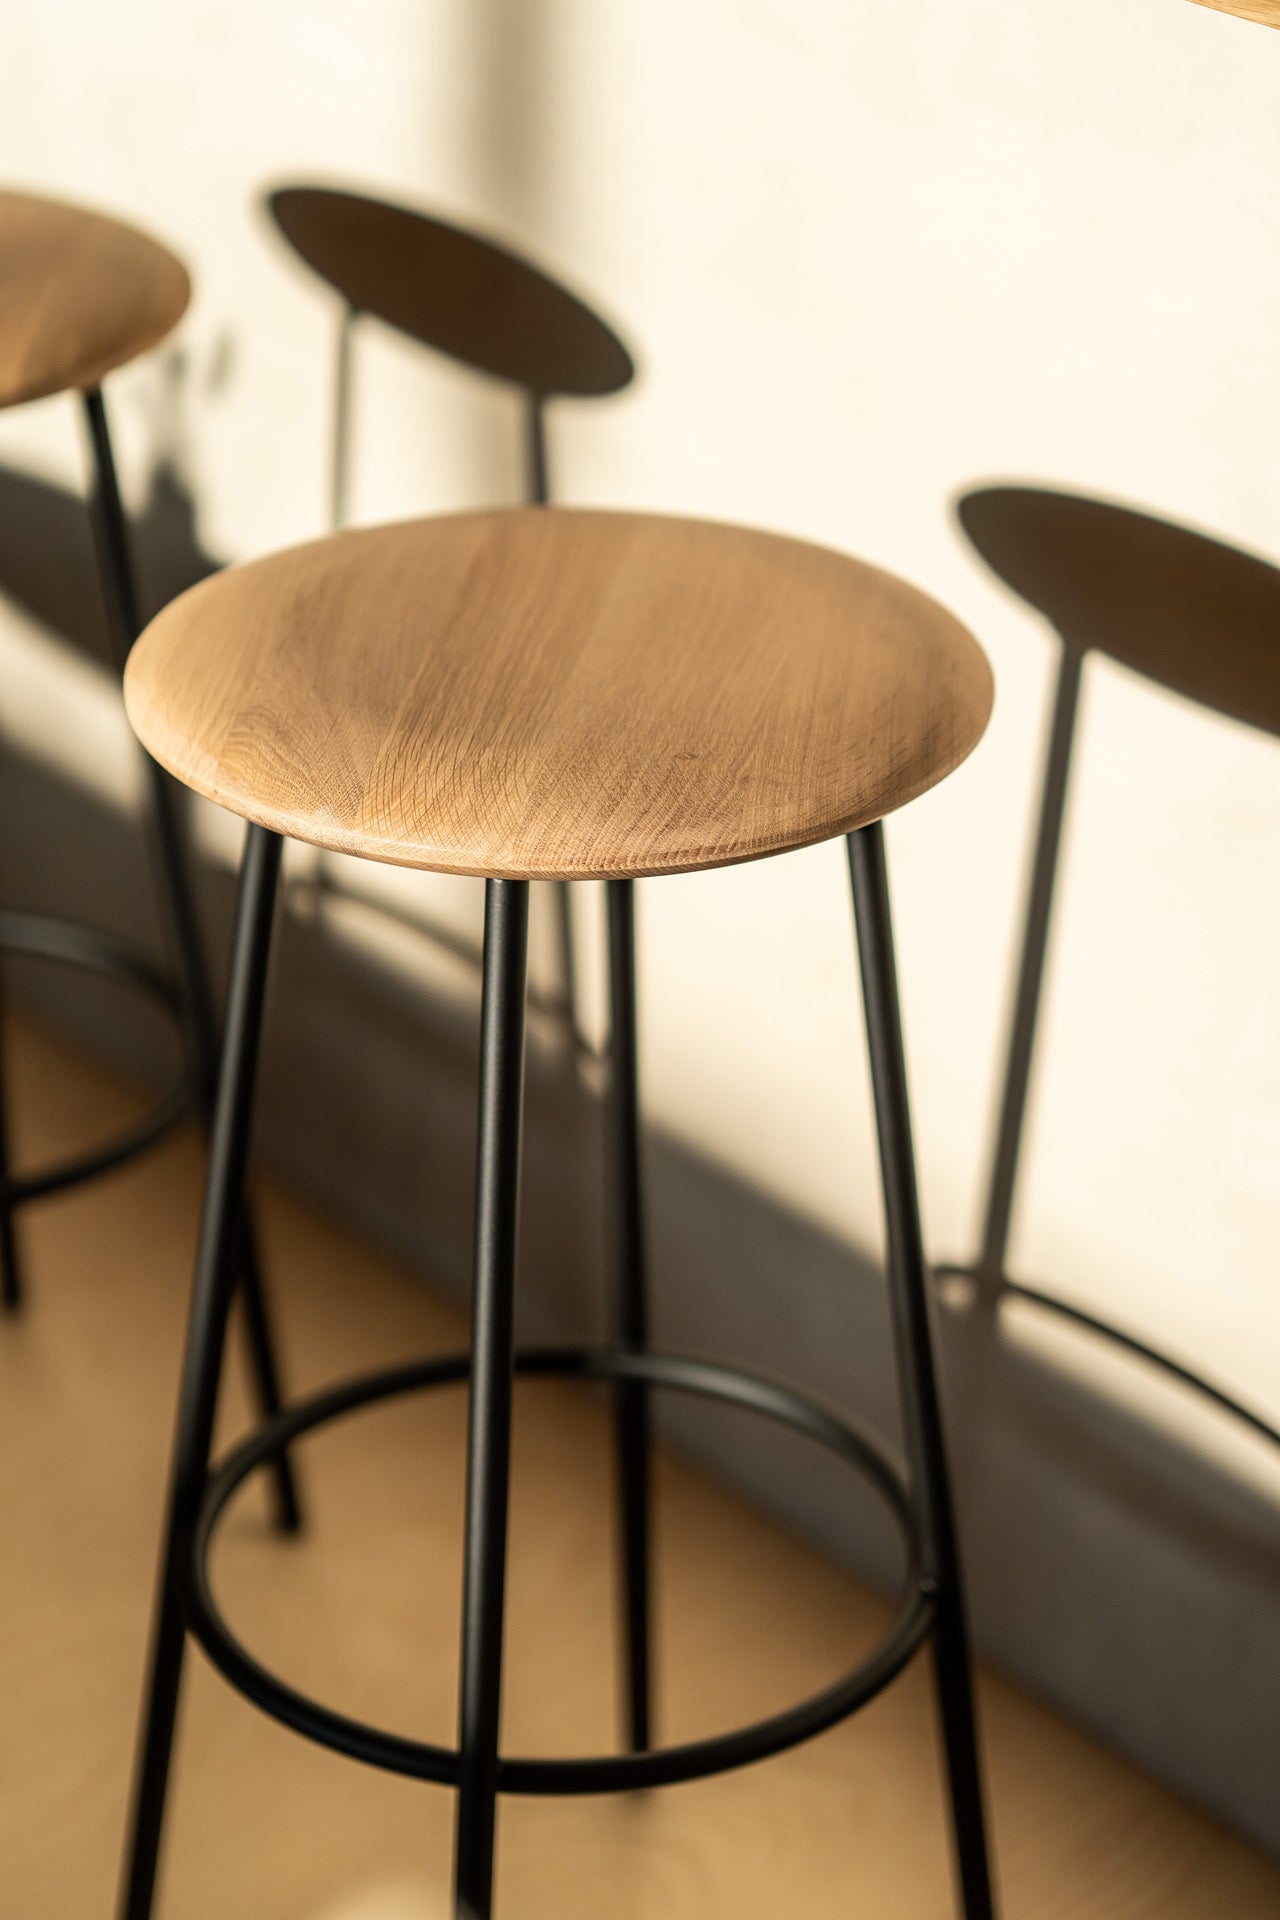 Ethnicraft Oak Baretto Bar Stool is available from Make Your House A Home, Bendigo, Victoria, Australia